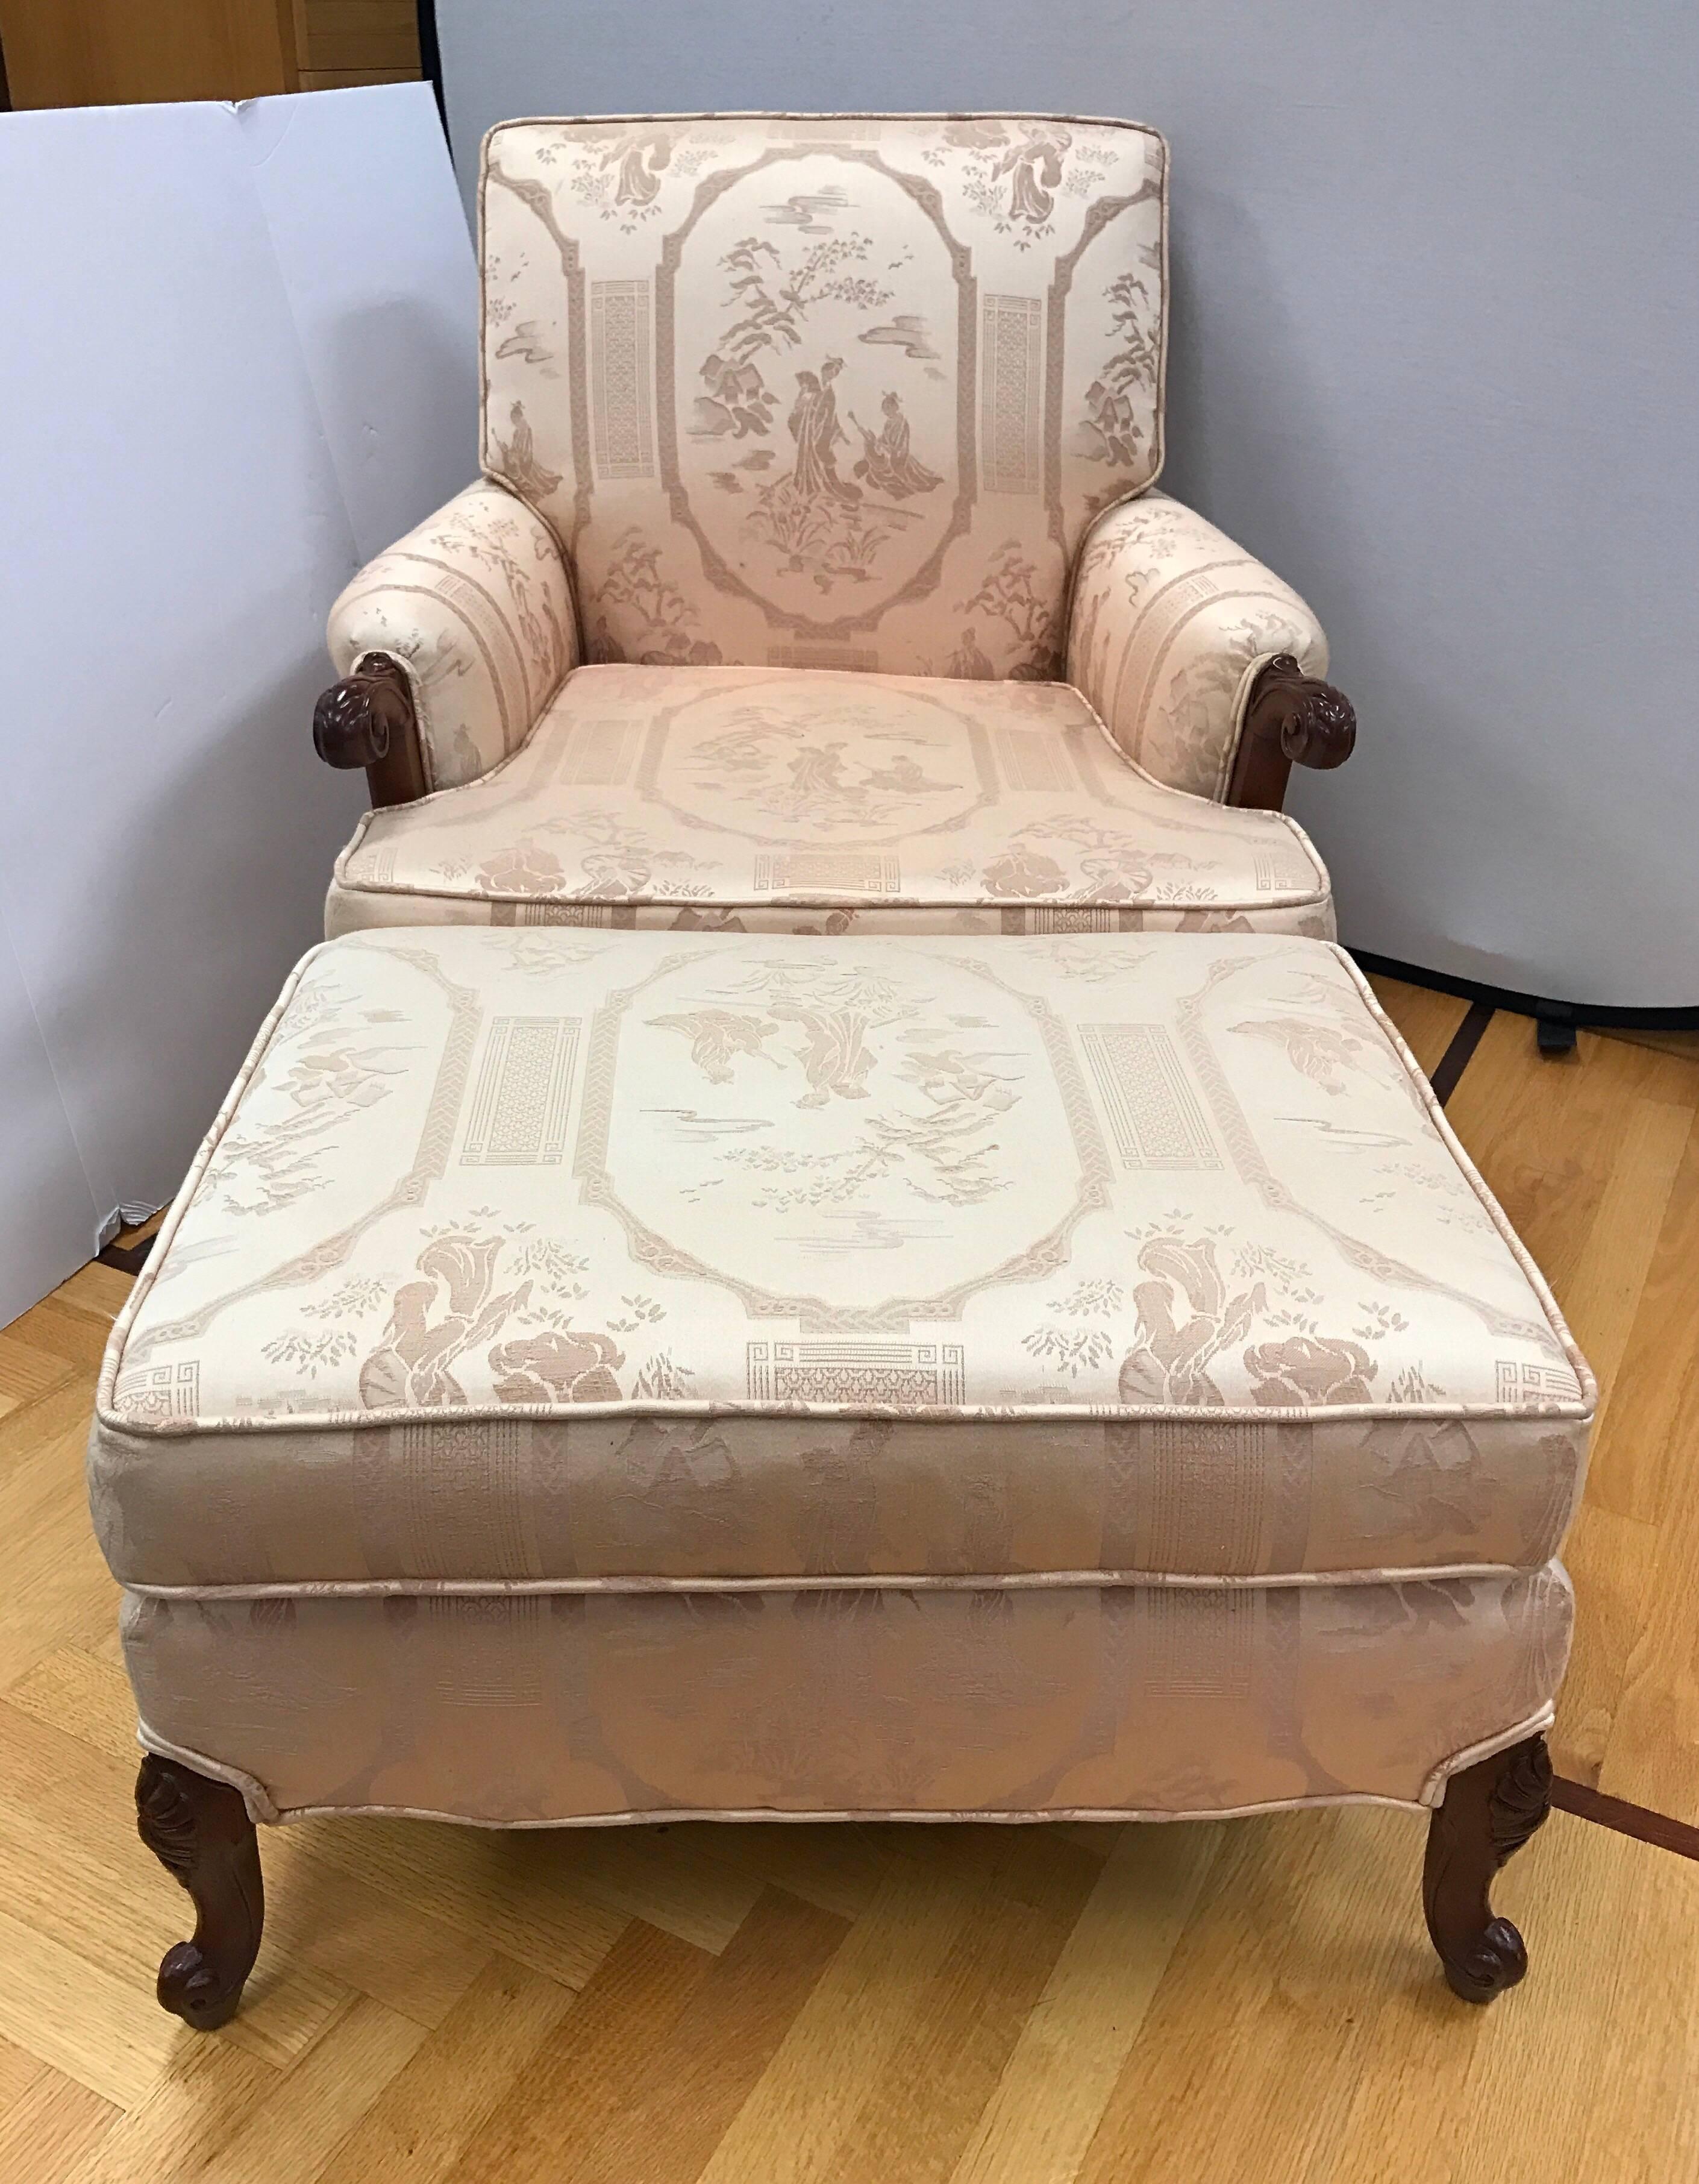 Vintage carved chair and matching ottoman with original fabric which is a light pink chinoiserie fabric. 